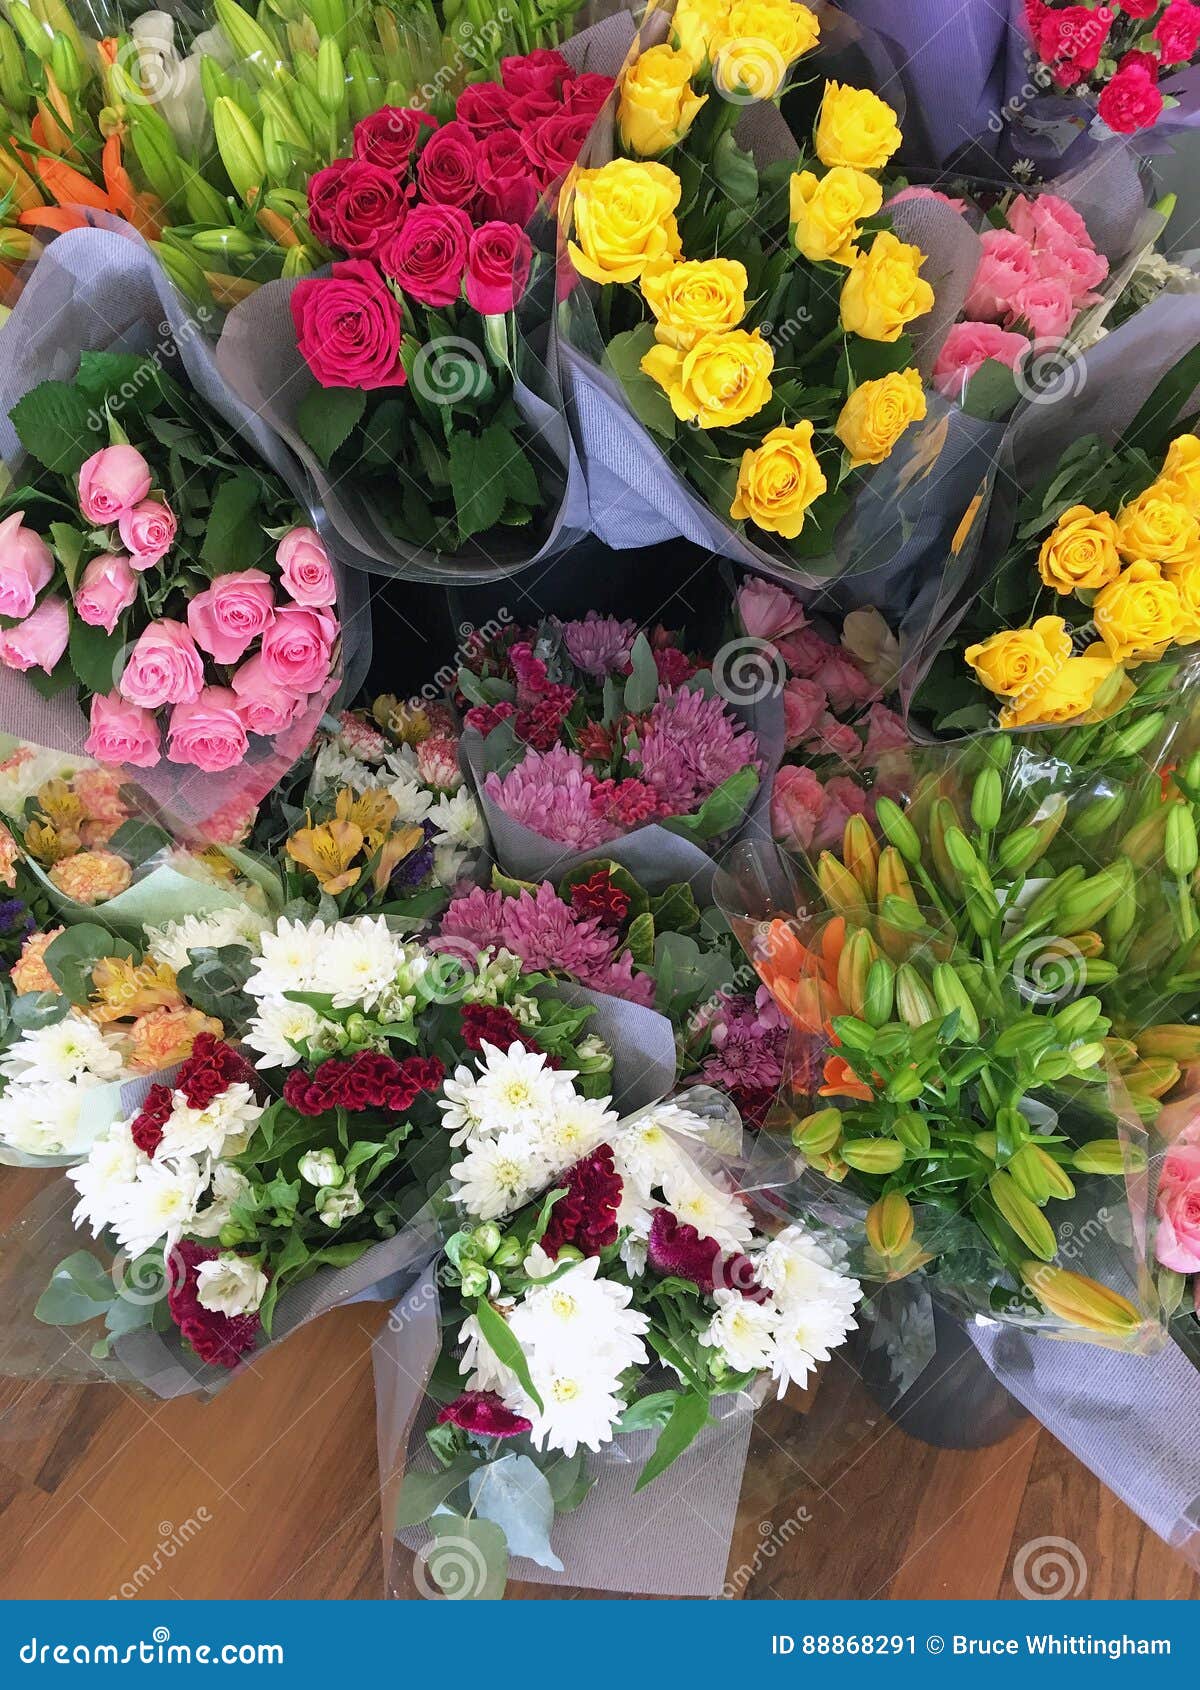 Colourful Cut Flower Bunches Stock Image - Image of celebrate, present ...